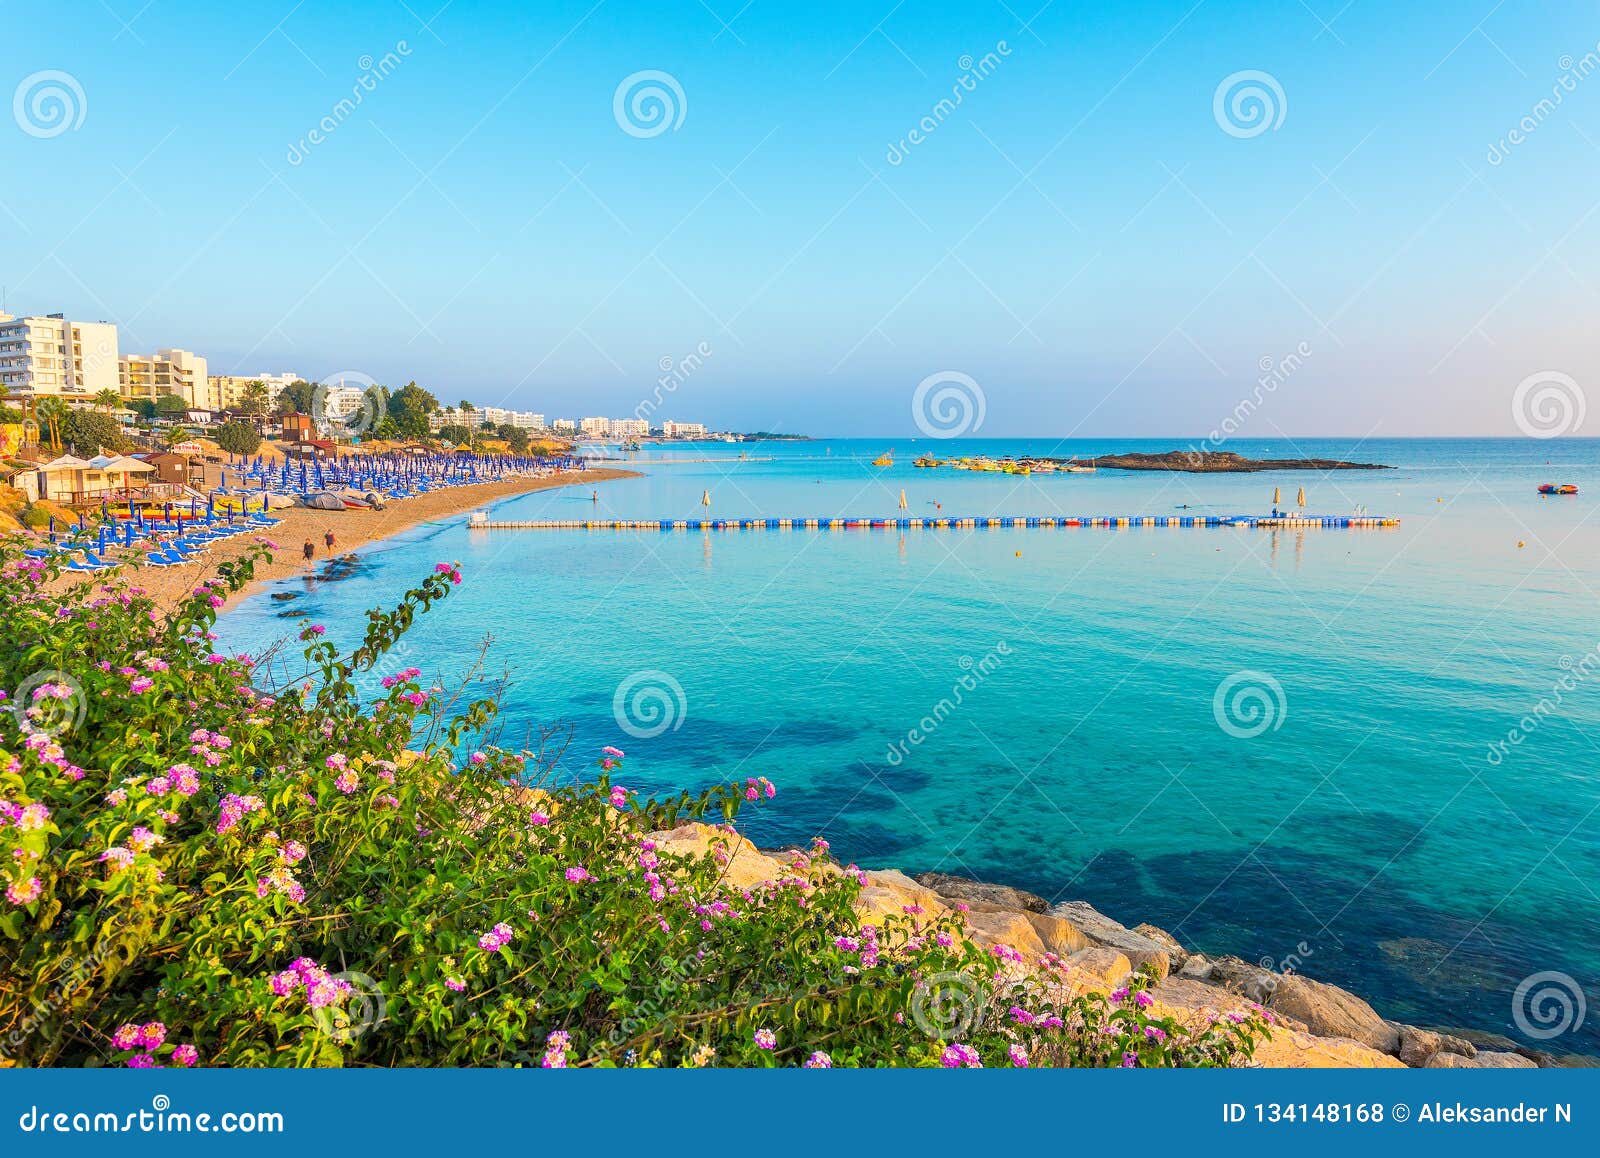 Canberra Vend om Blå Fig Tree Bay Beach in Protaras, Cyprus Stock Photo - Image of holiday,  island: 134148168